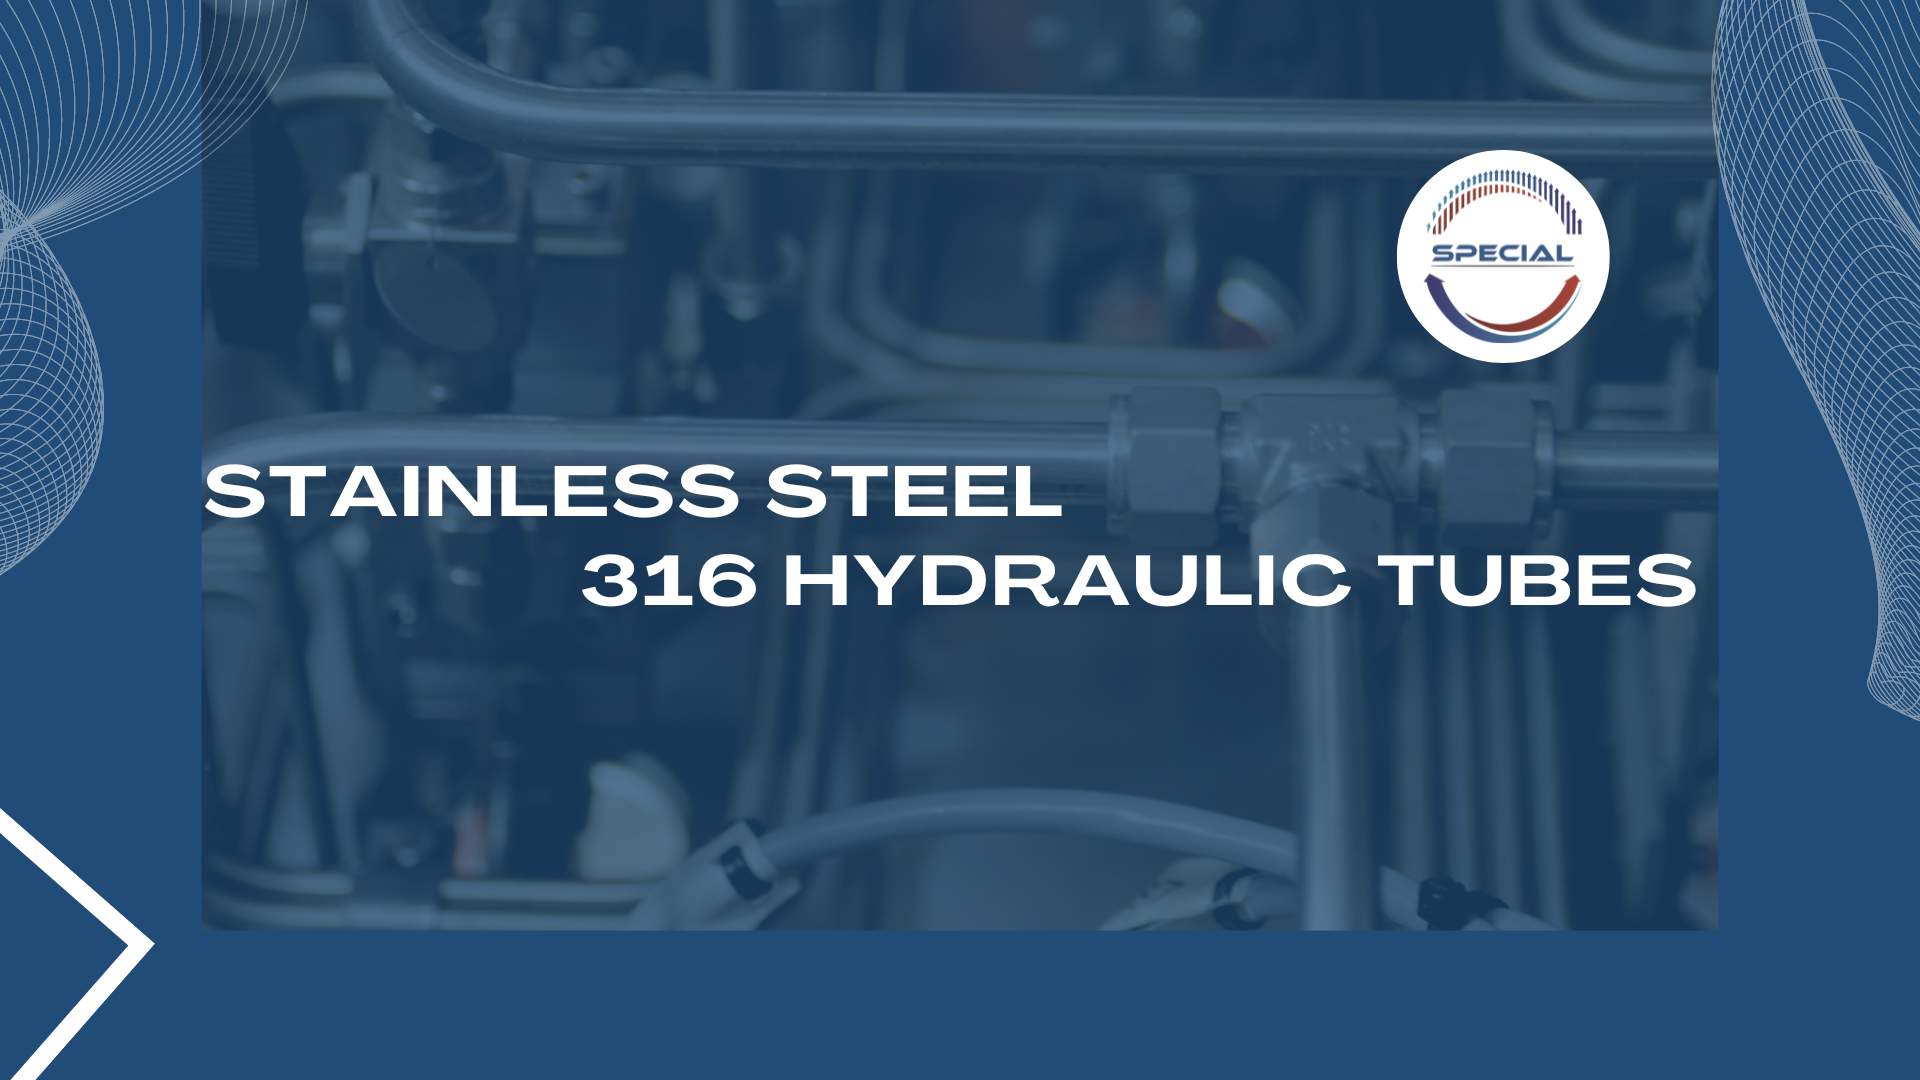 Stainless steel 316 hydraulic tubes